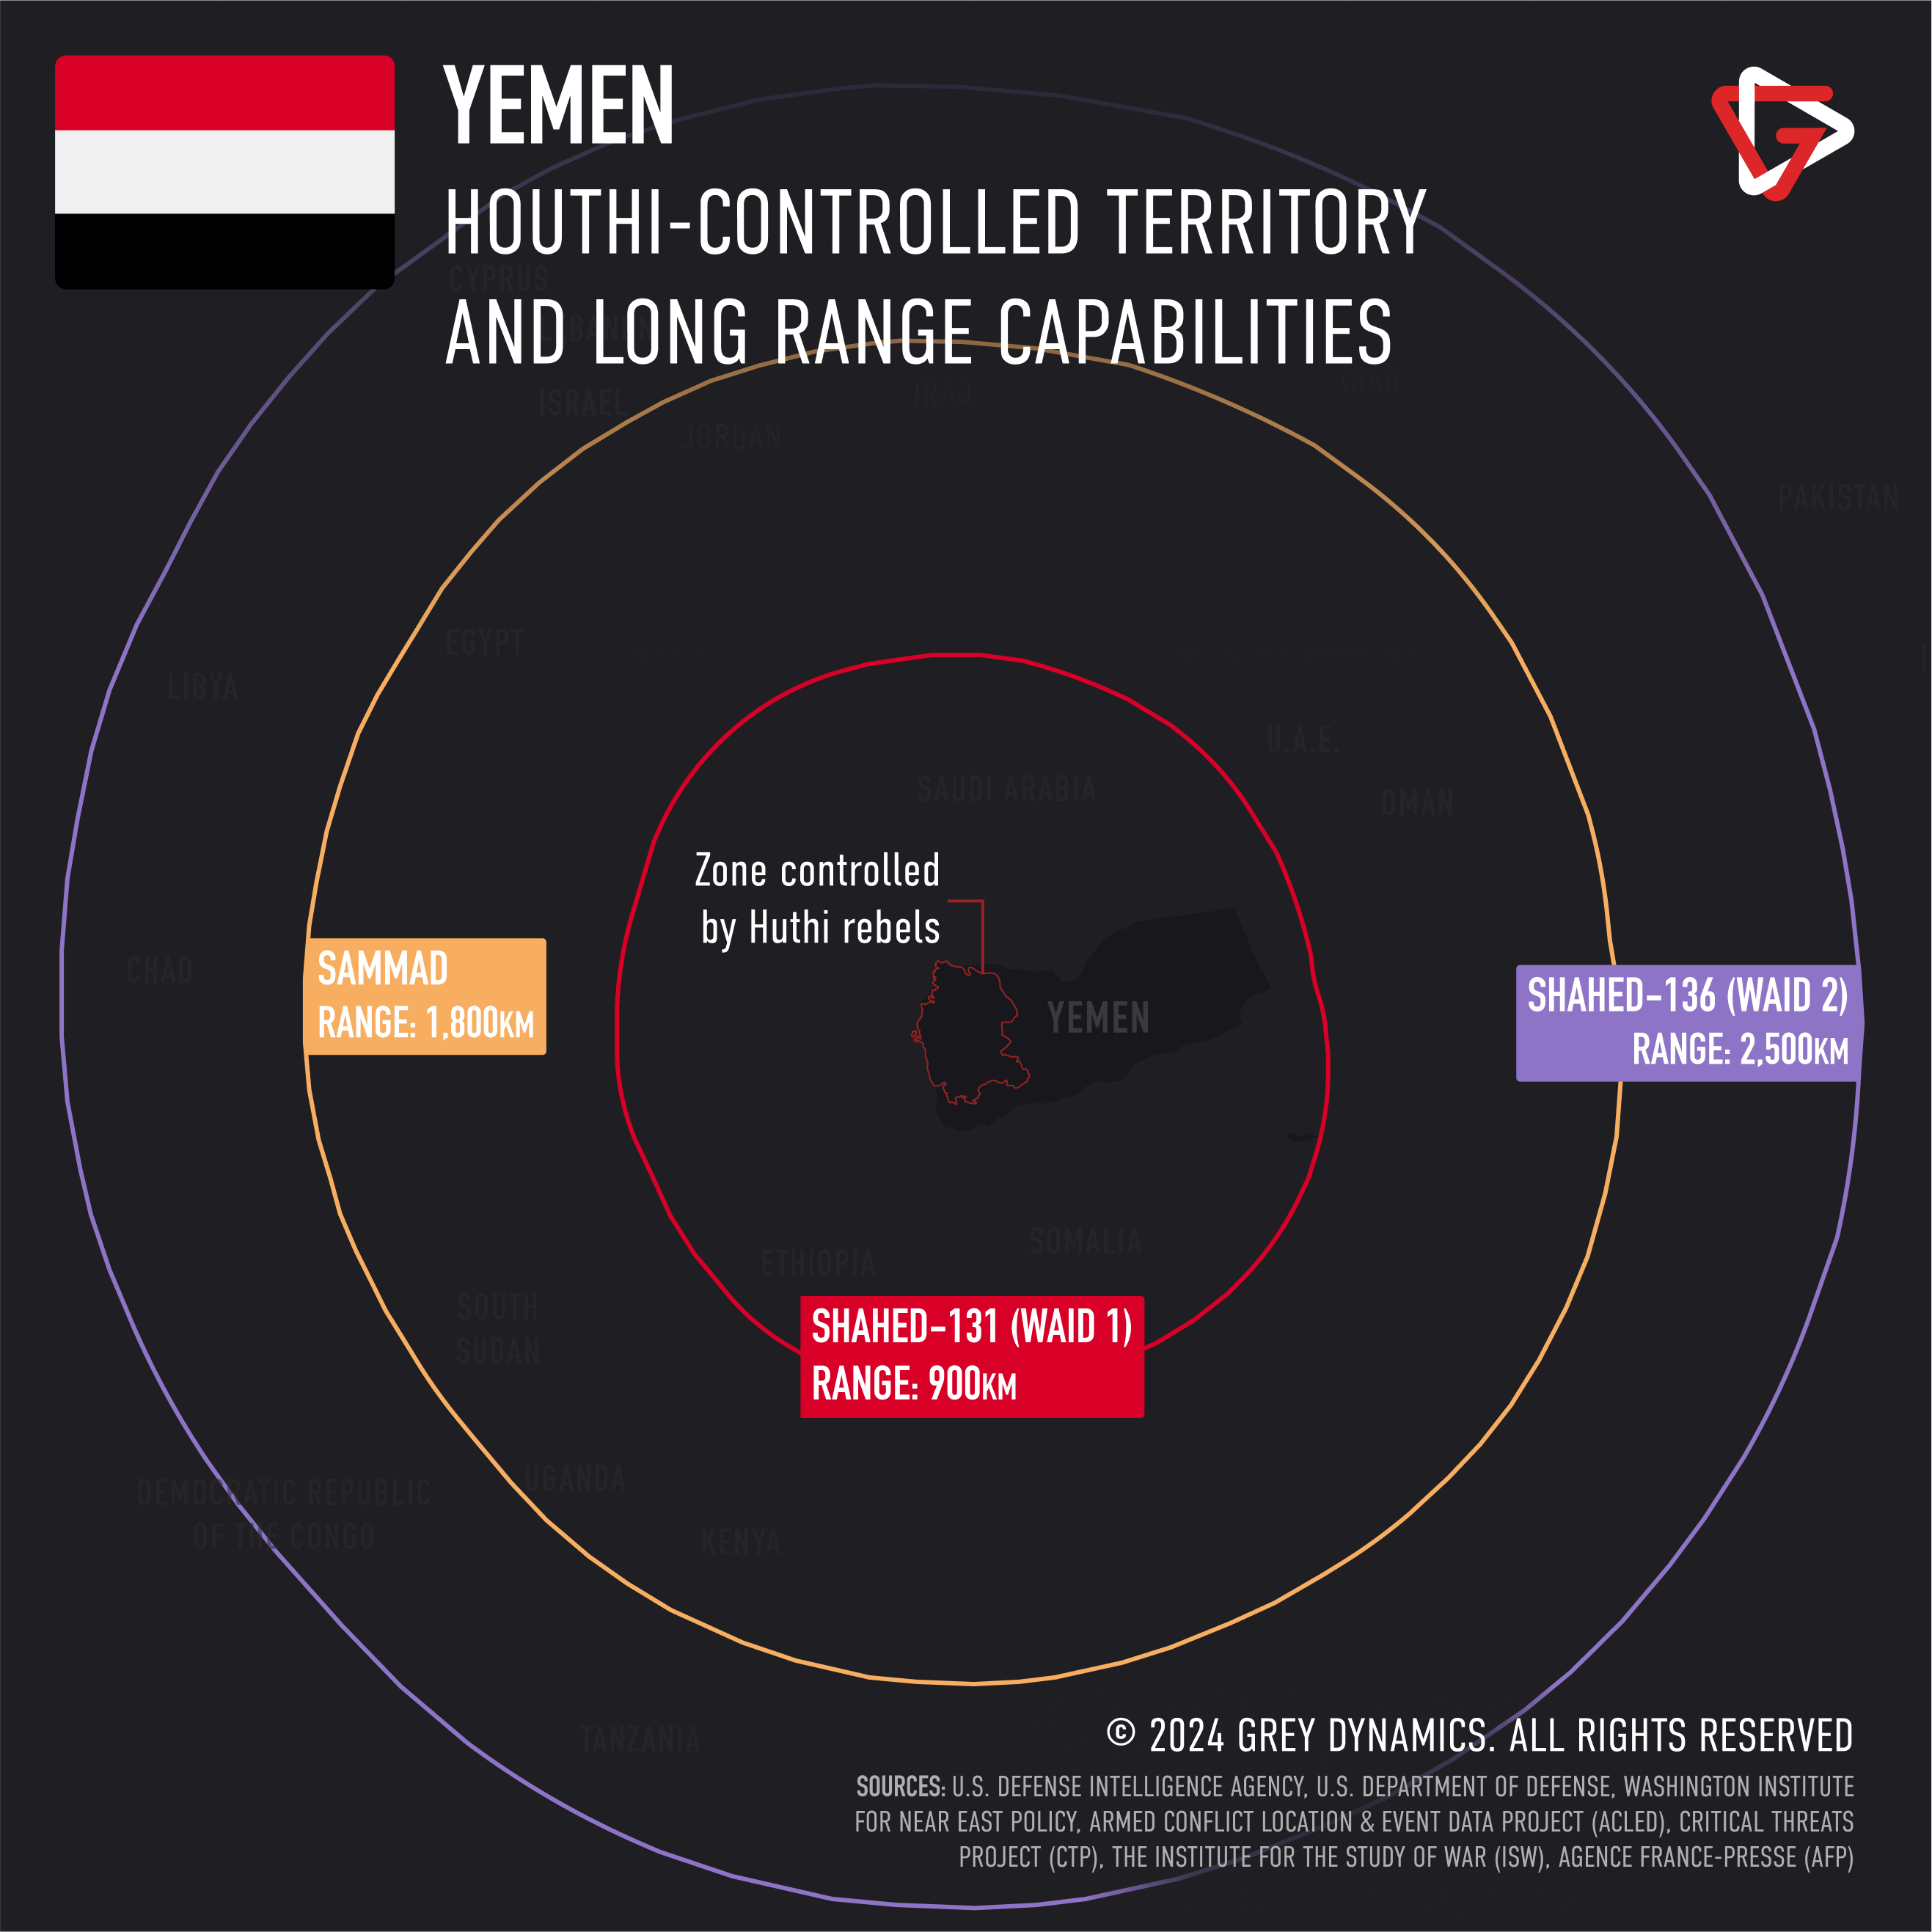 Houthi-controlled (Ansar Allah) territory and long-range capabilities.